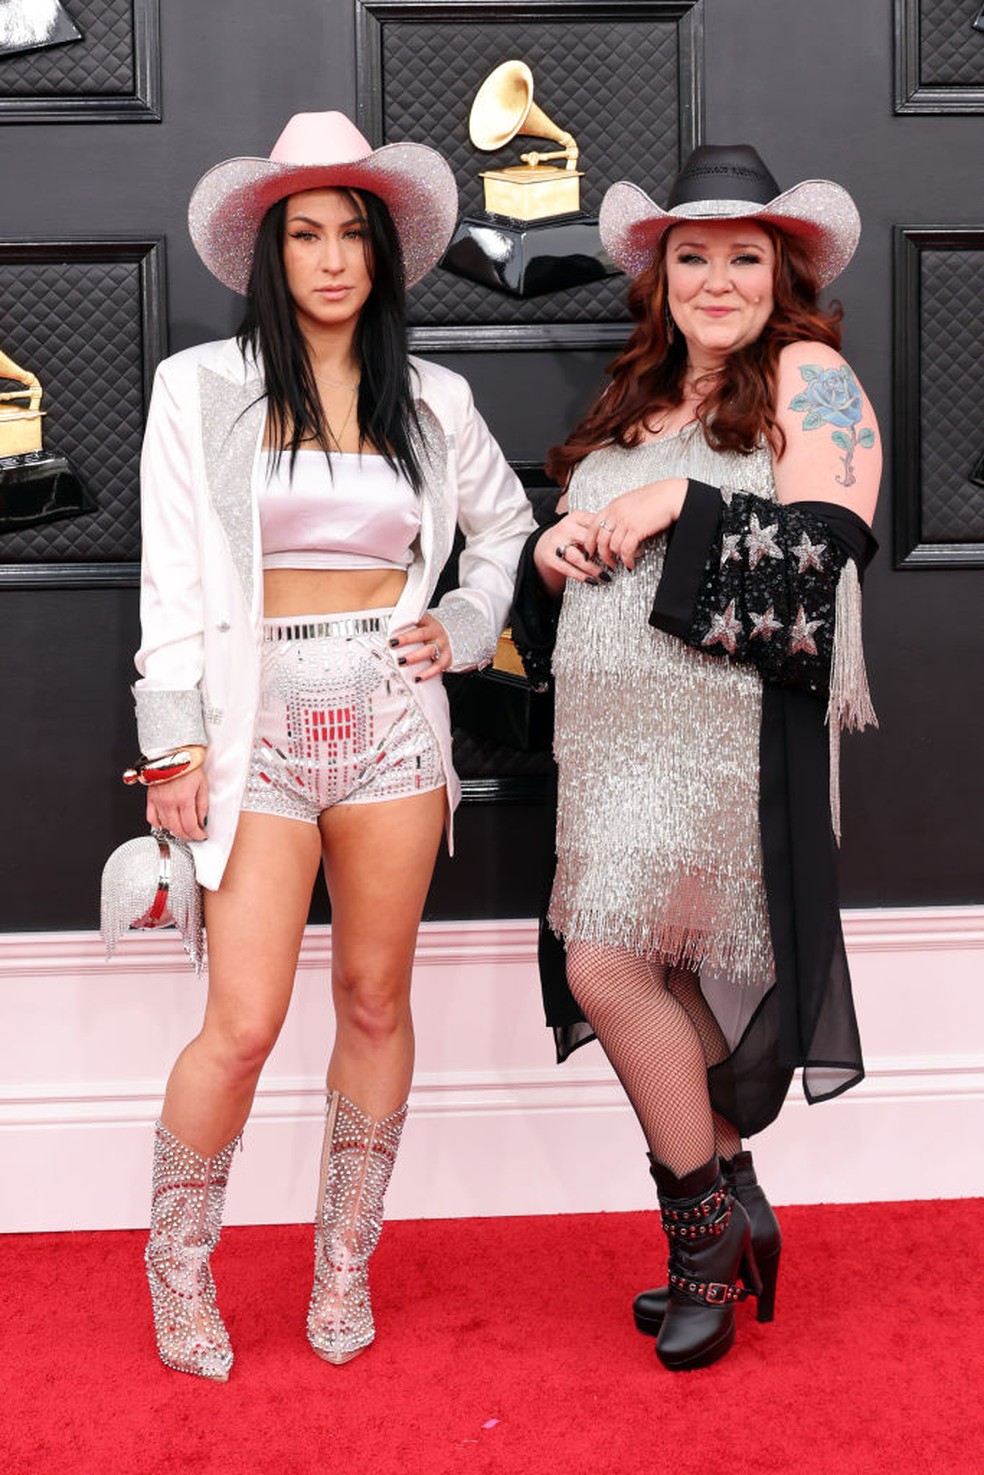  Summer Overstreet e Audra Mae (The Chattahoochies) — Foto: Getty Images